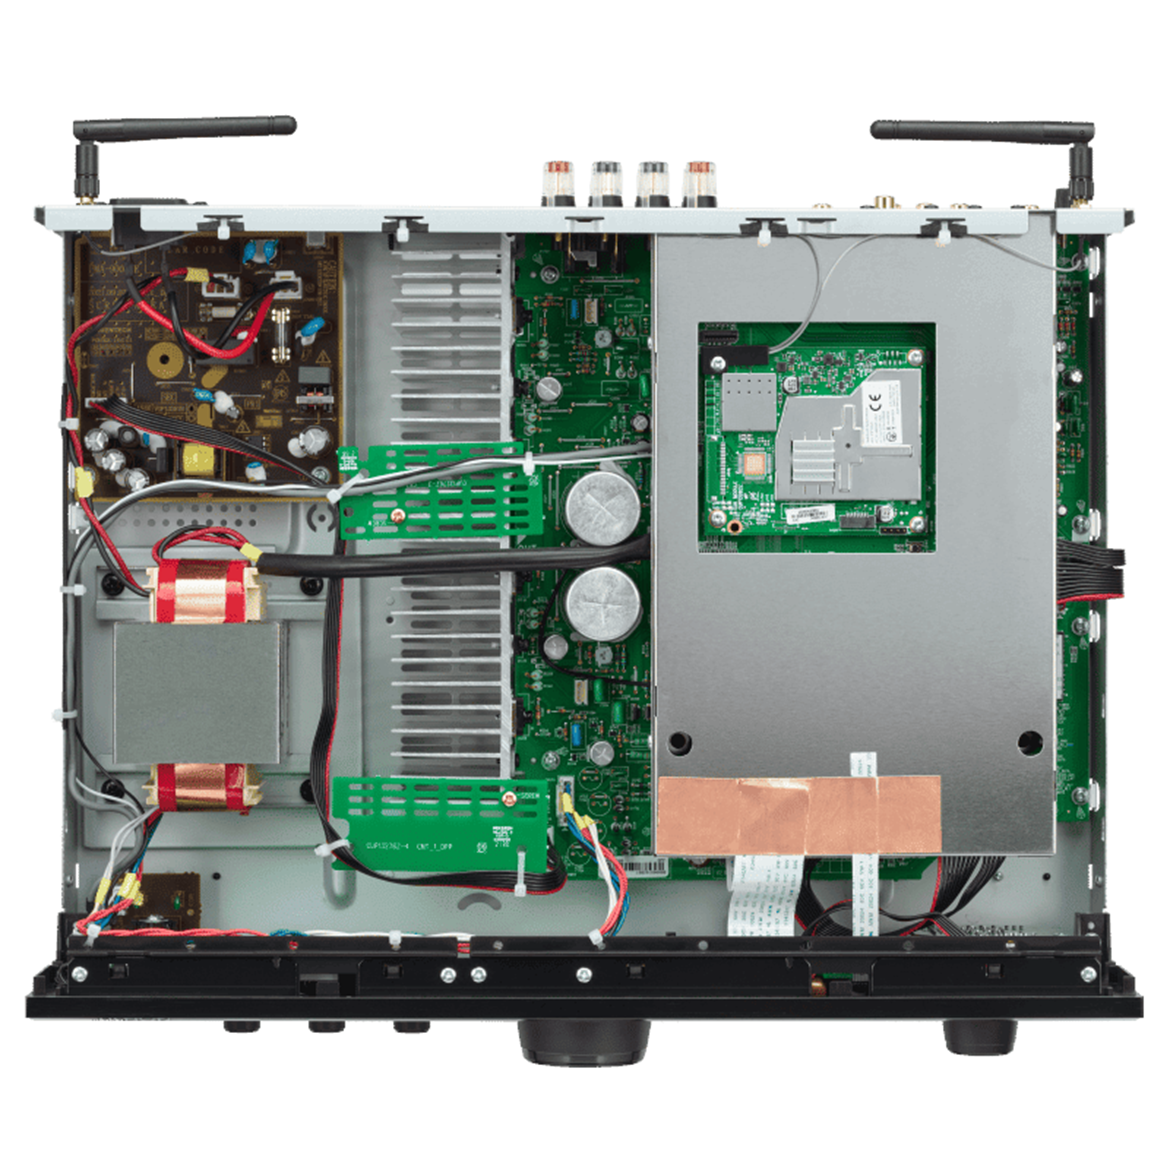 The EI type laminated transformer (left) is away from the digital circuitry protected by a metal case.